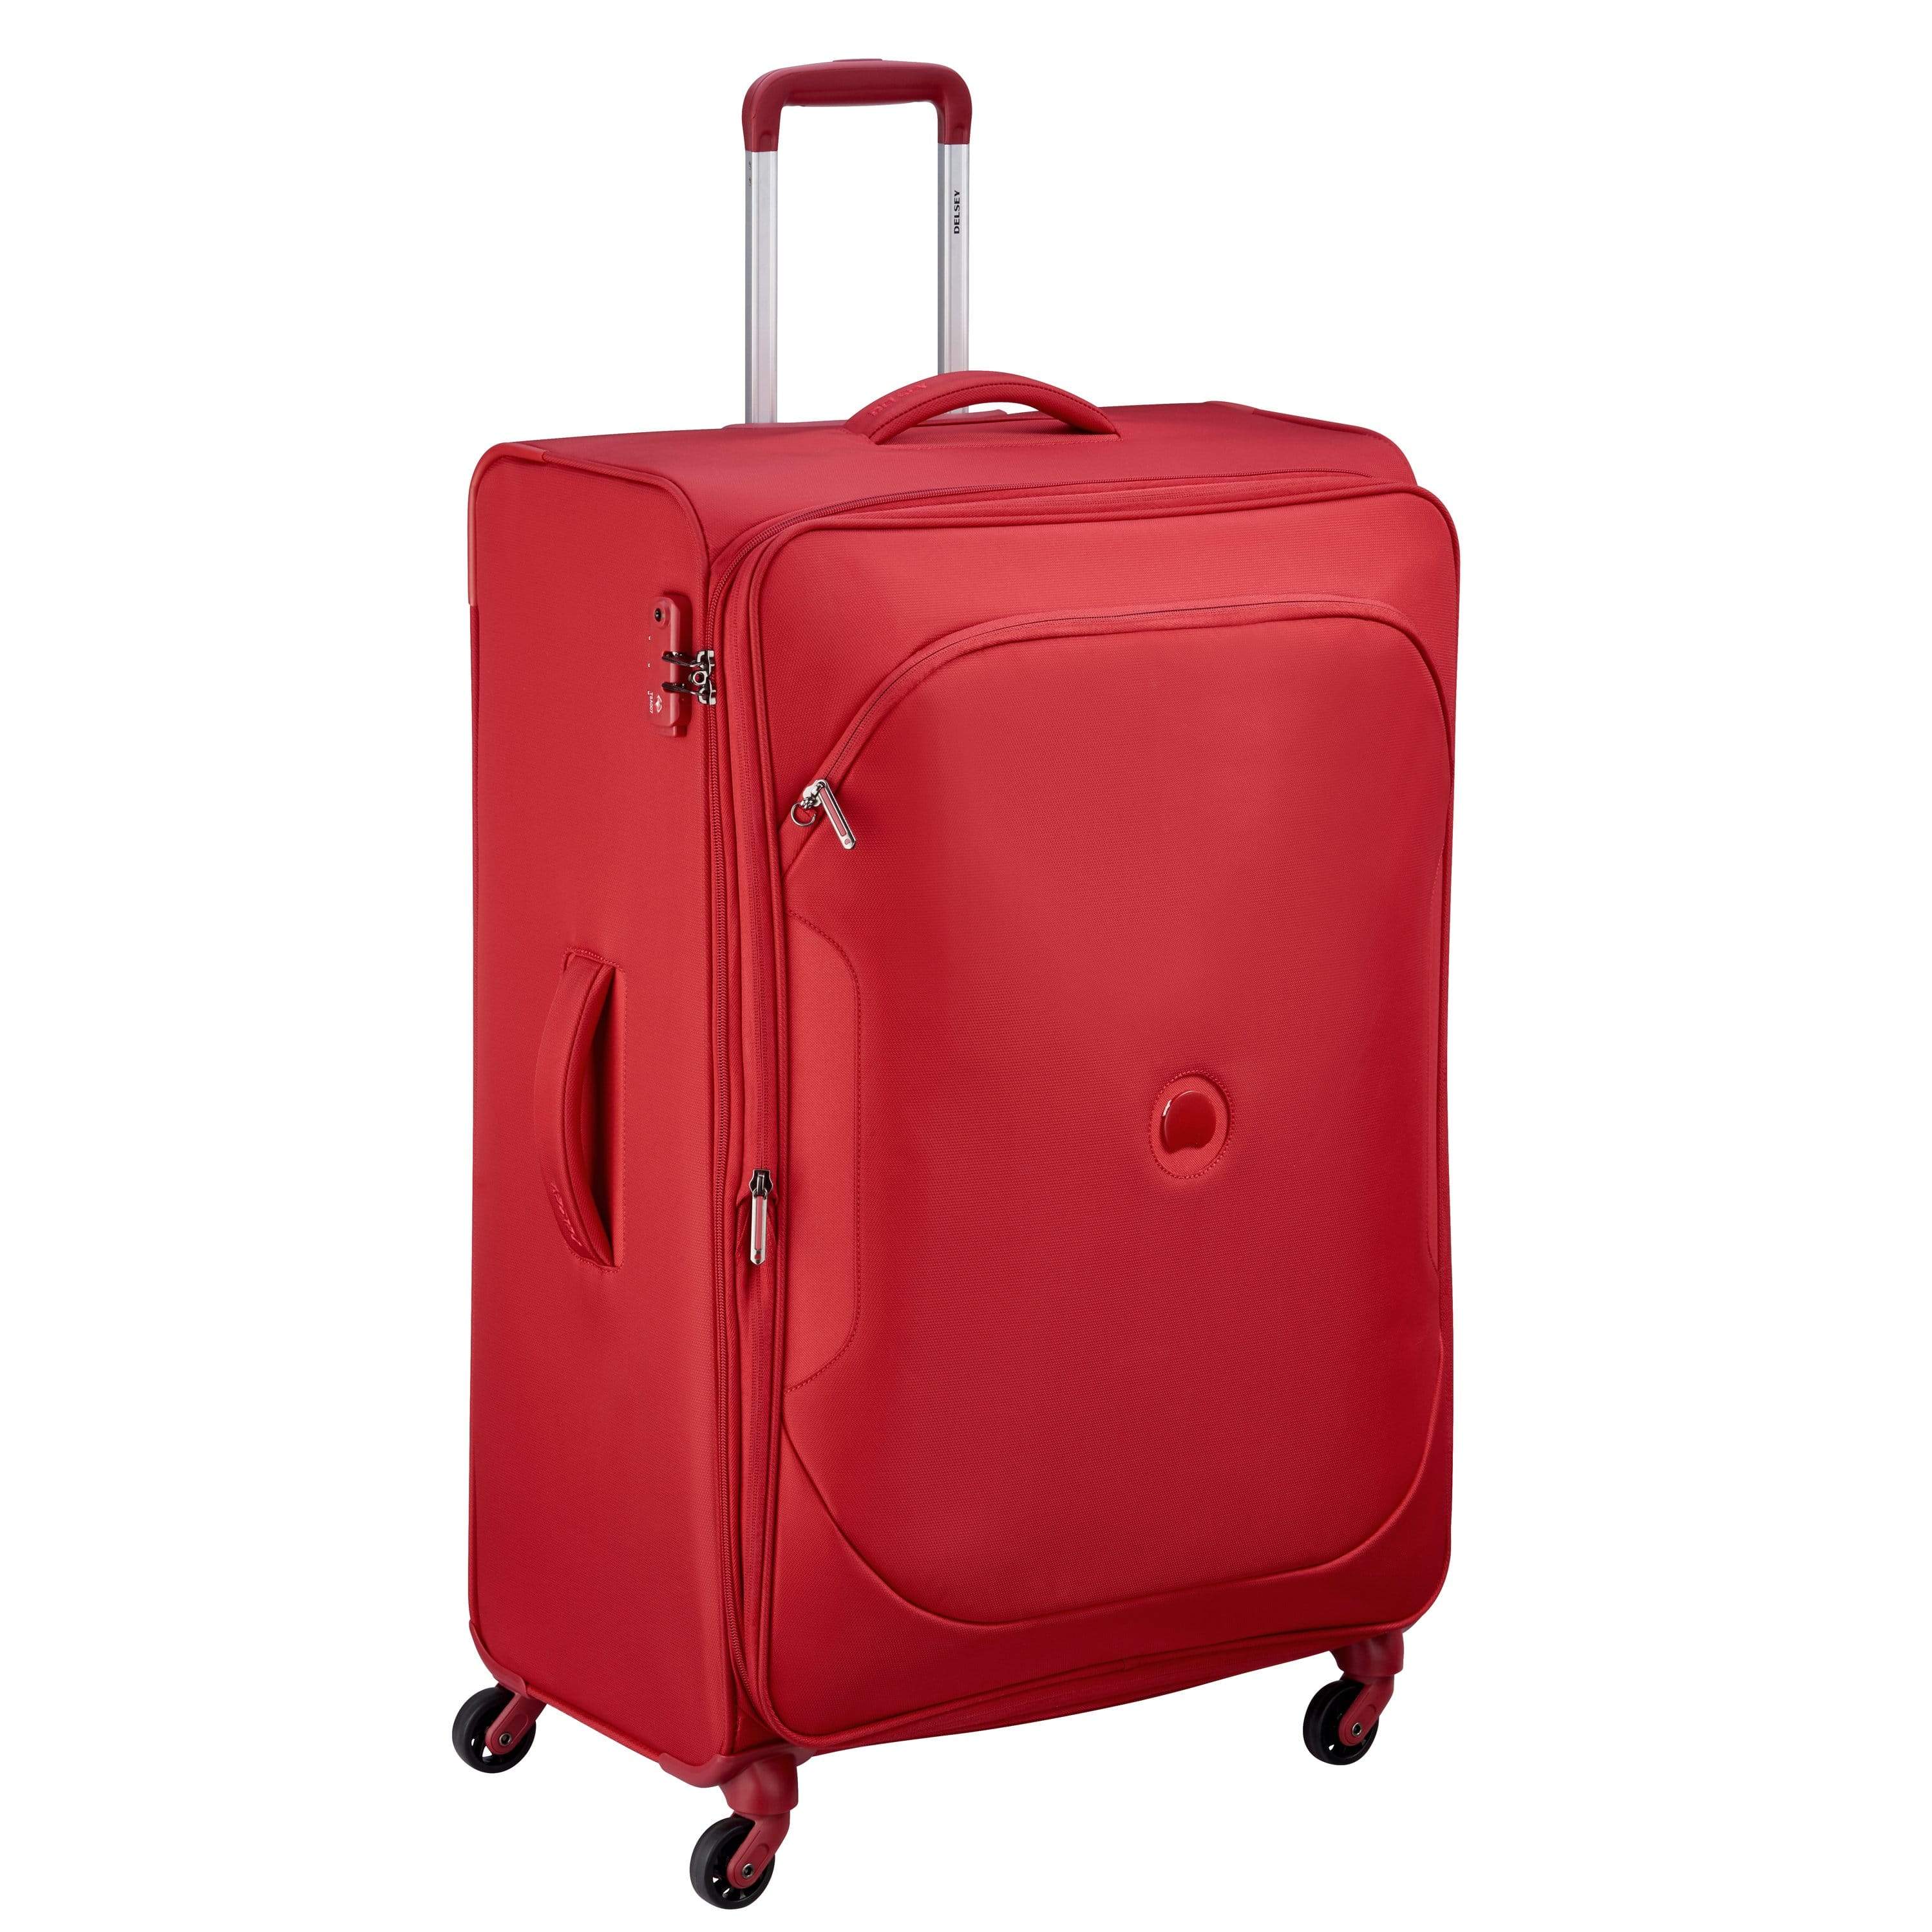 DELSEY ULITE CLASSIC 3 79 4W EXP TR CA RED